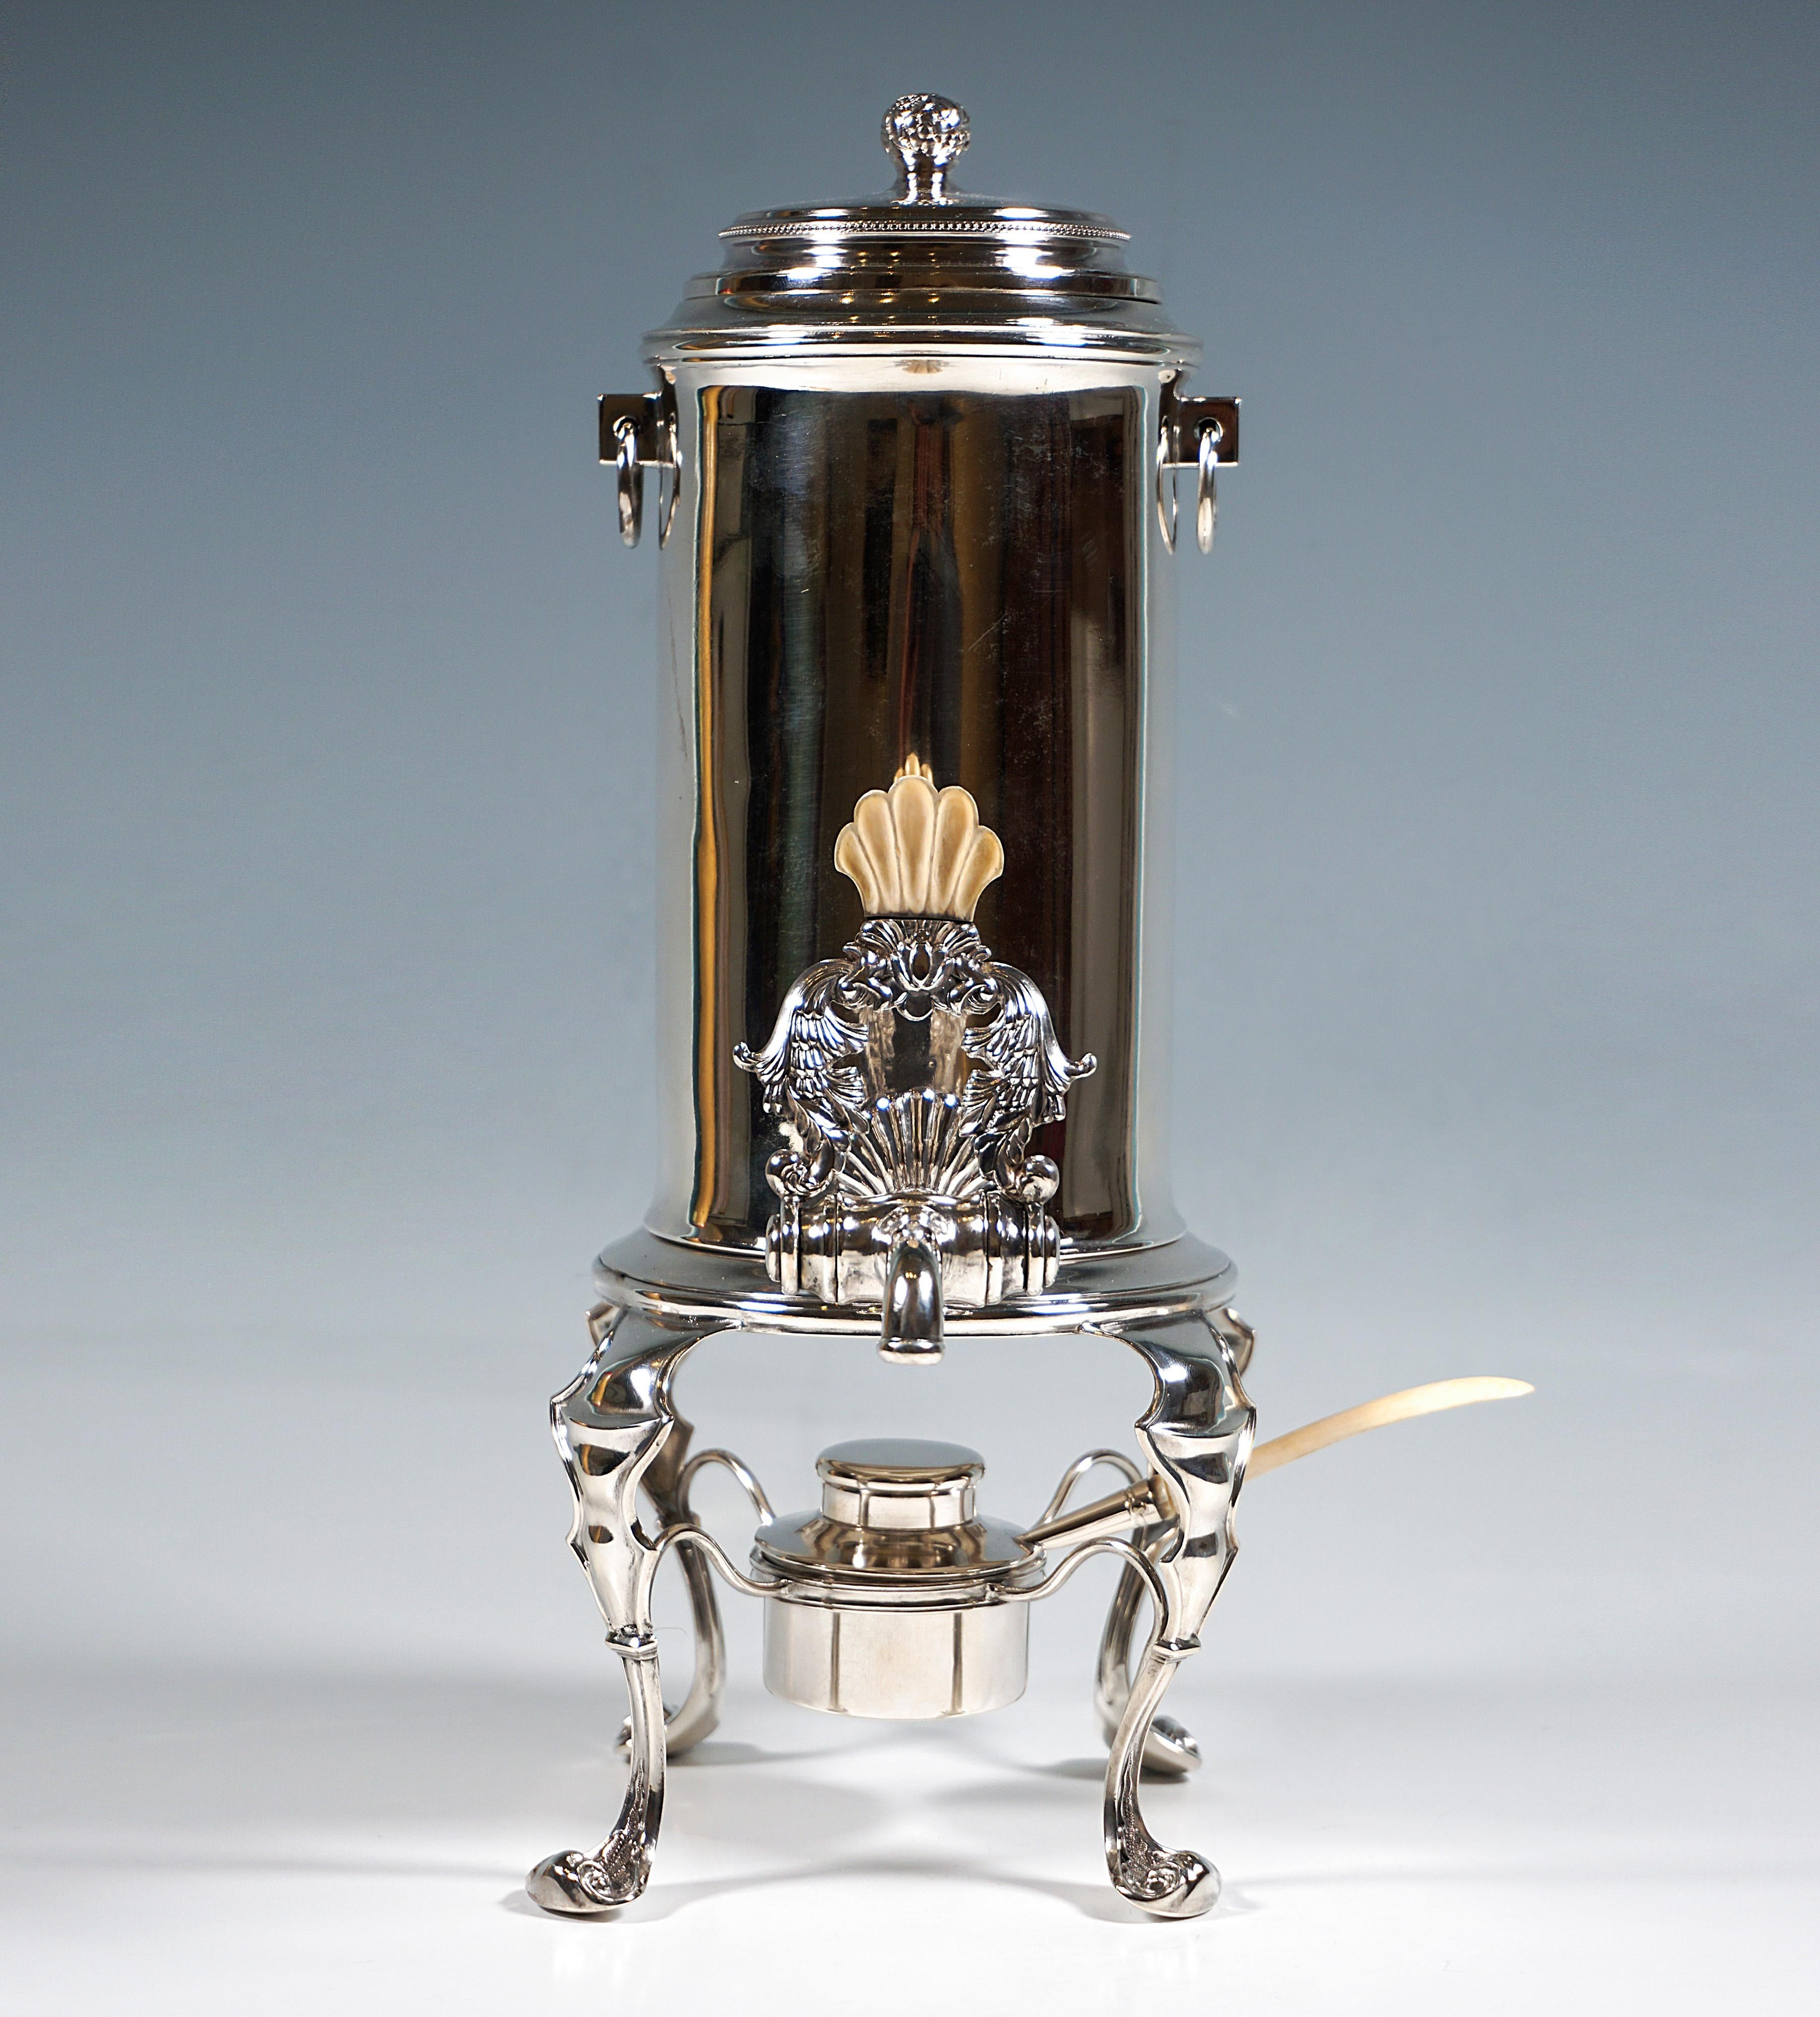 Consists of a hot water vessel with a lockable spout, a silver frame and a burner.
Cylindrical vessel with two drop ring handles, removable lid with acanthus knob, pouring lever with flower bouquet decoration and bone handle in the shape of a shell;